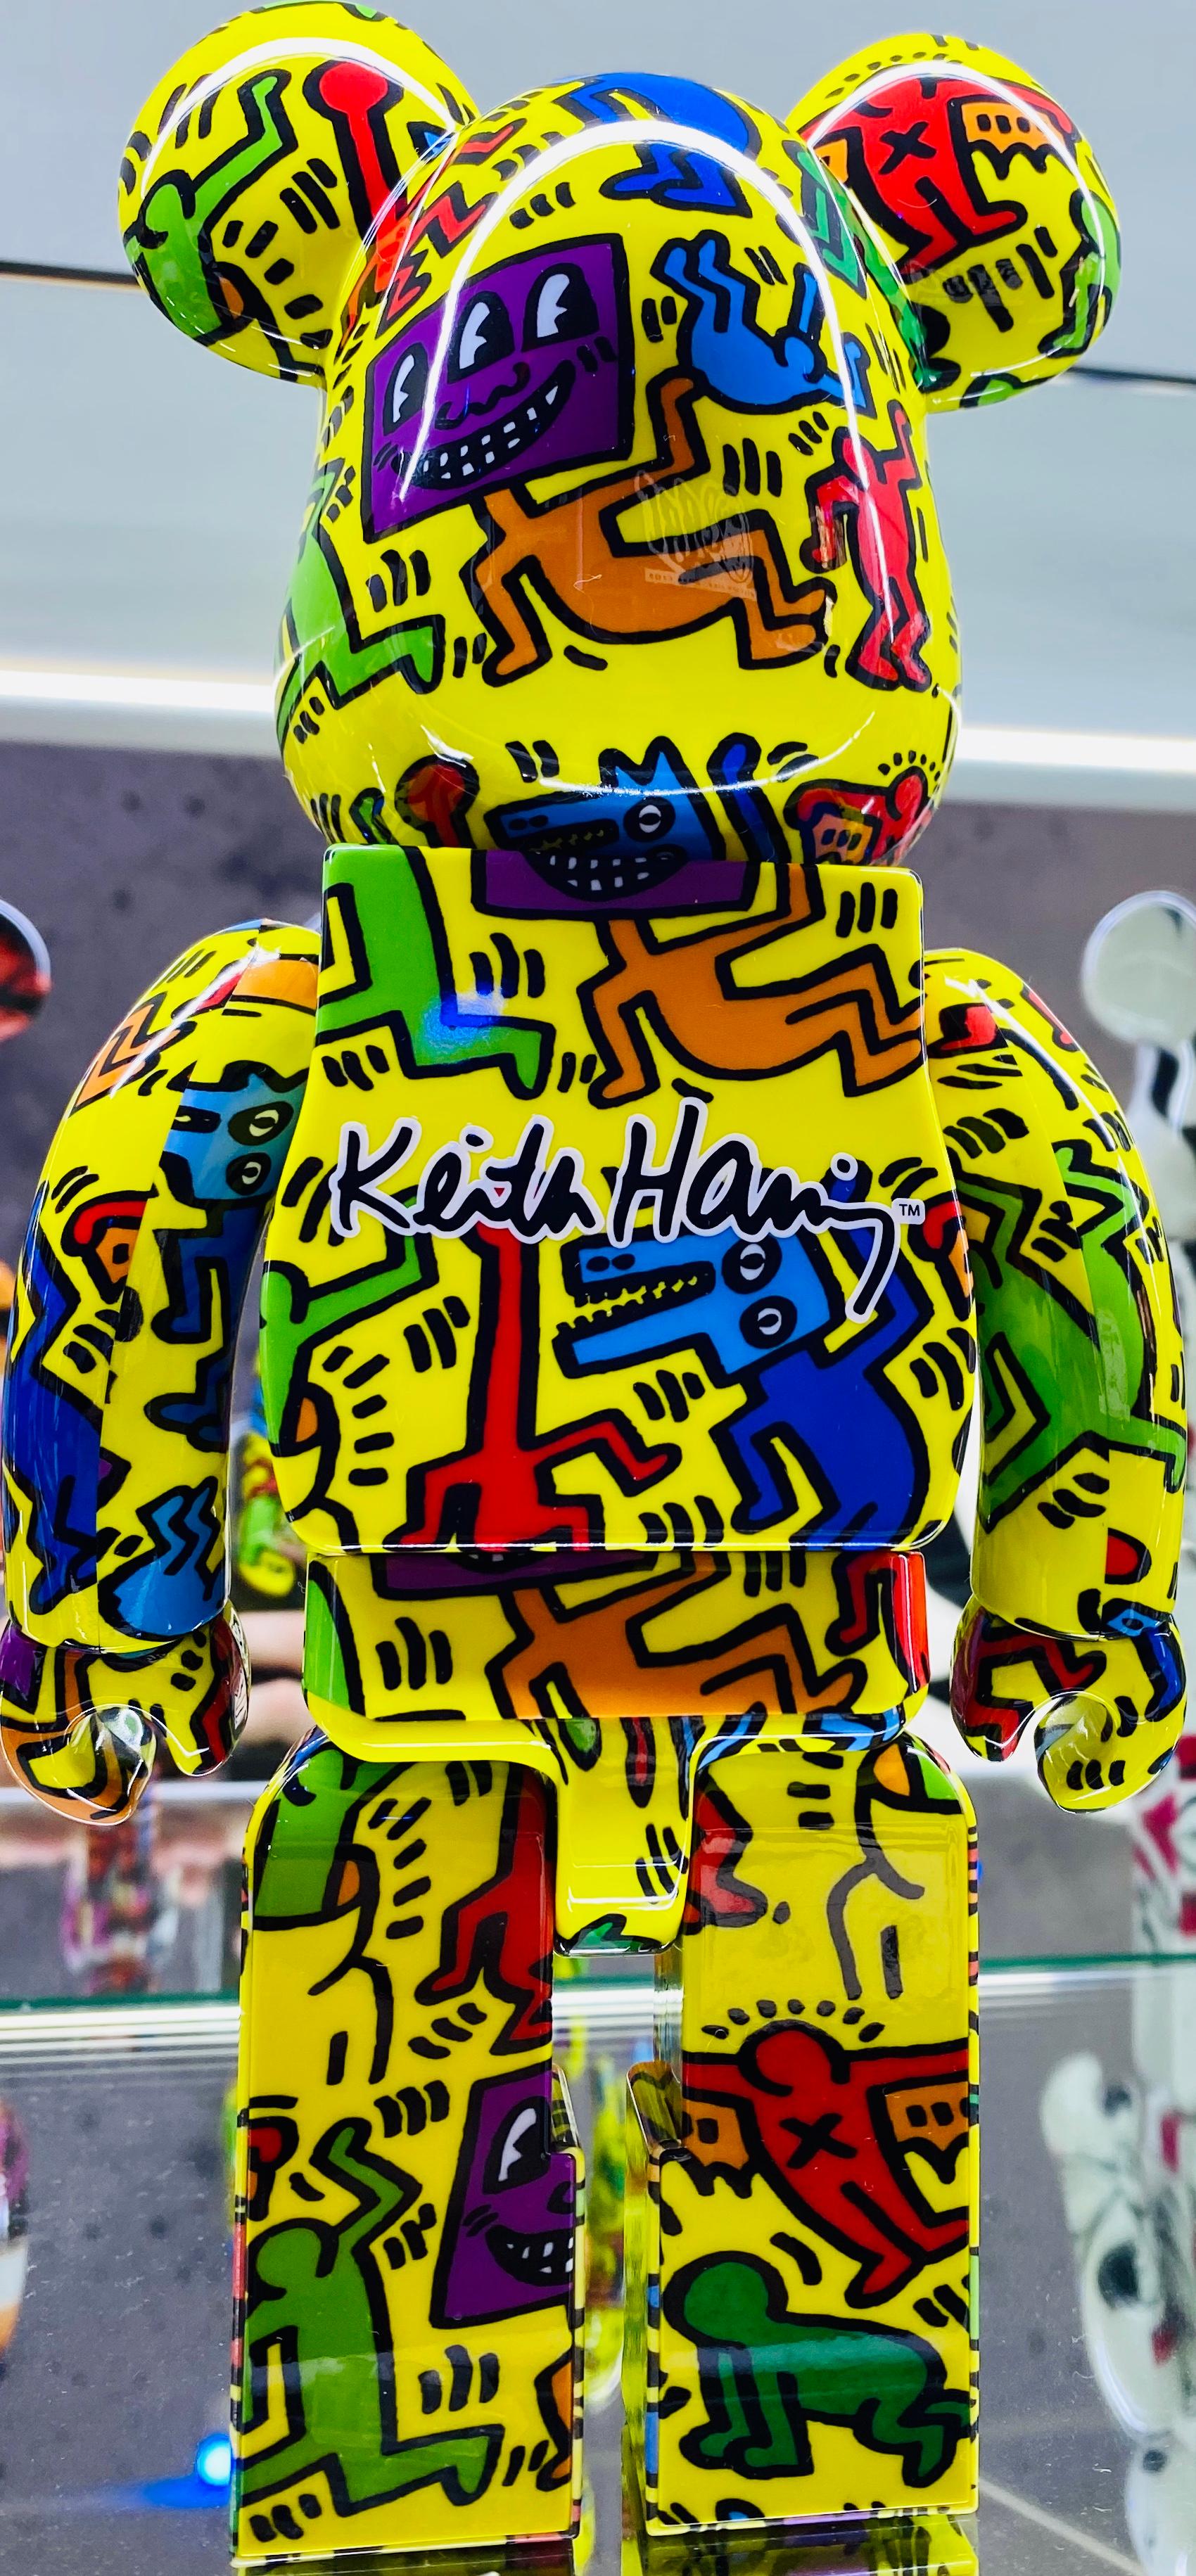 Keith Haring Bearbrick 400% figure (Haring BE@RBRICK) - Street Art Print by (after) Keith Haring